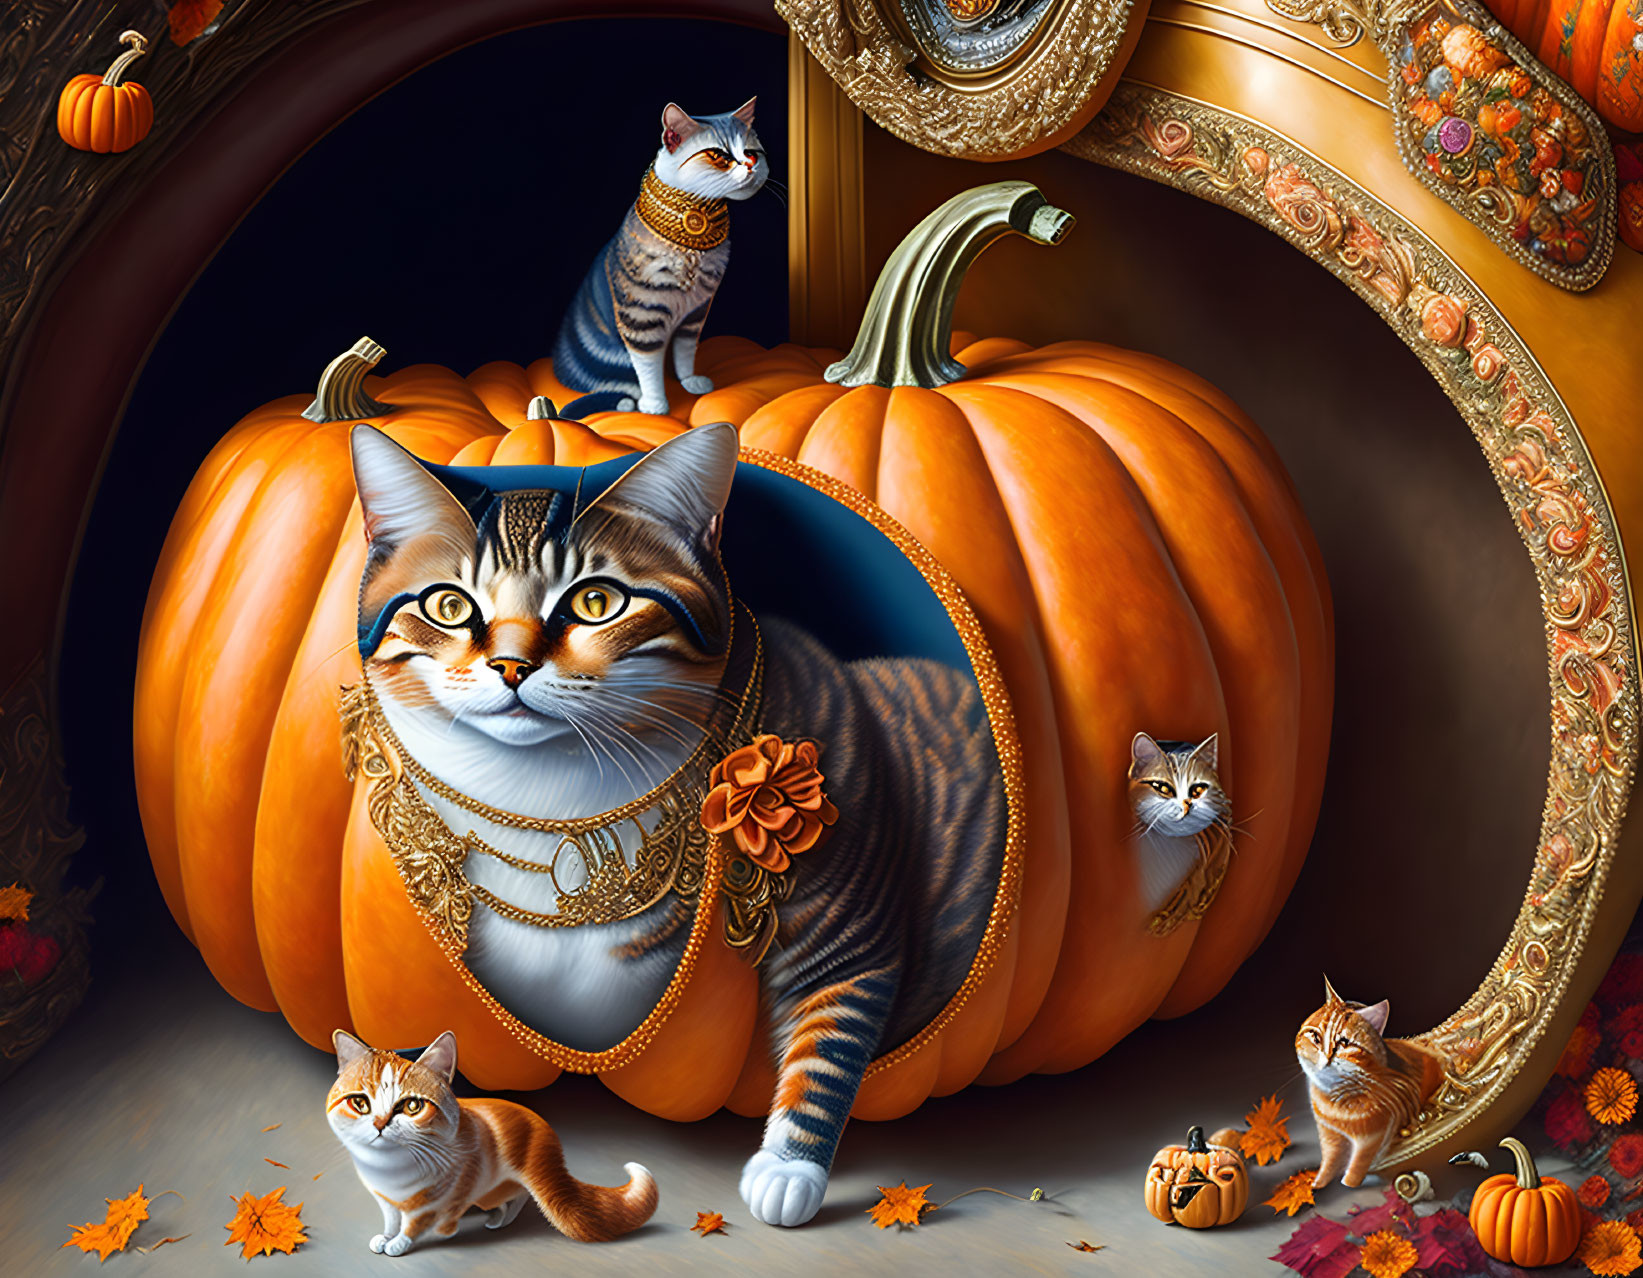 Puss in Boots and Cinderella driving a pumpkin